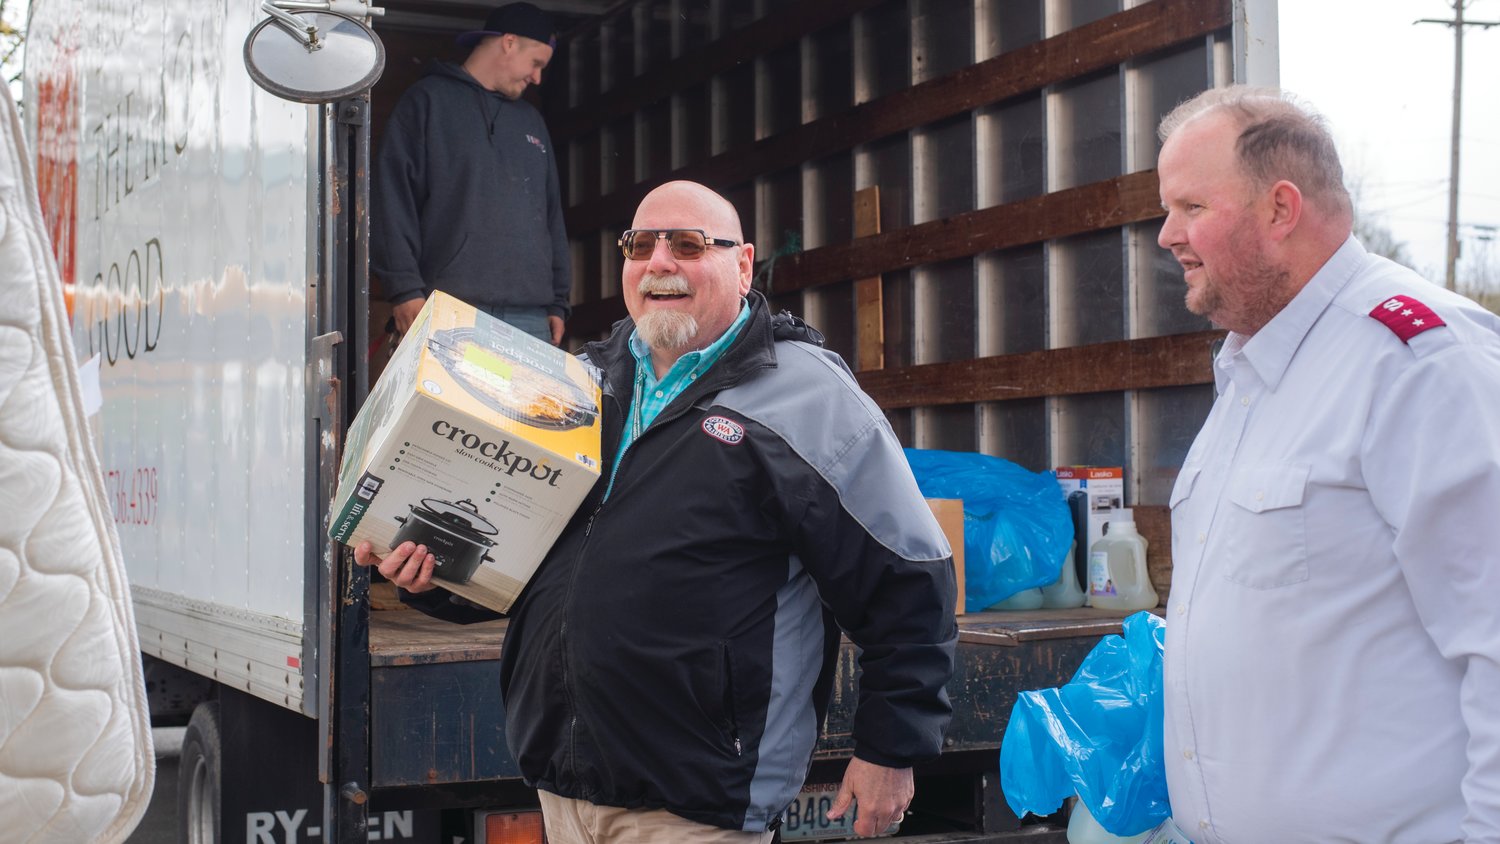 Lewis County Emergency Management Deputy Director Ross McDowell smiles while carrying a crockpot alongside a mattress and other items with Steven Pack of the Salvation Army for residents moving back into the Chehalis Avenue Apartments on Wednesday afternoon.